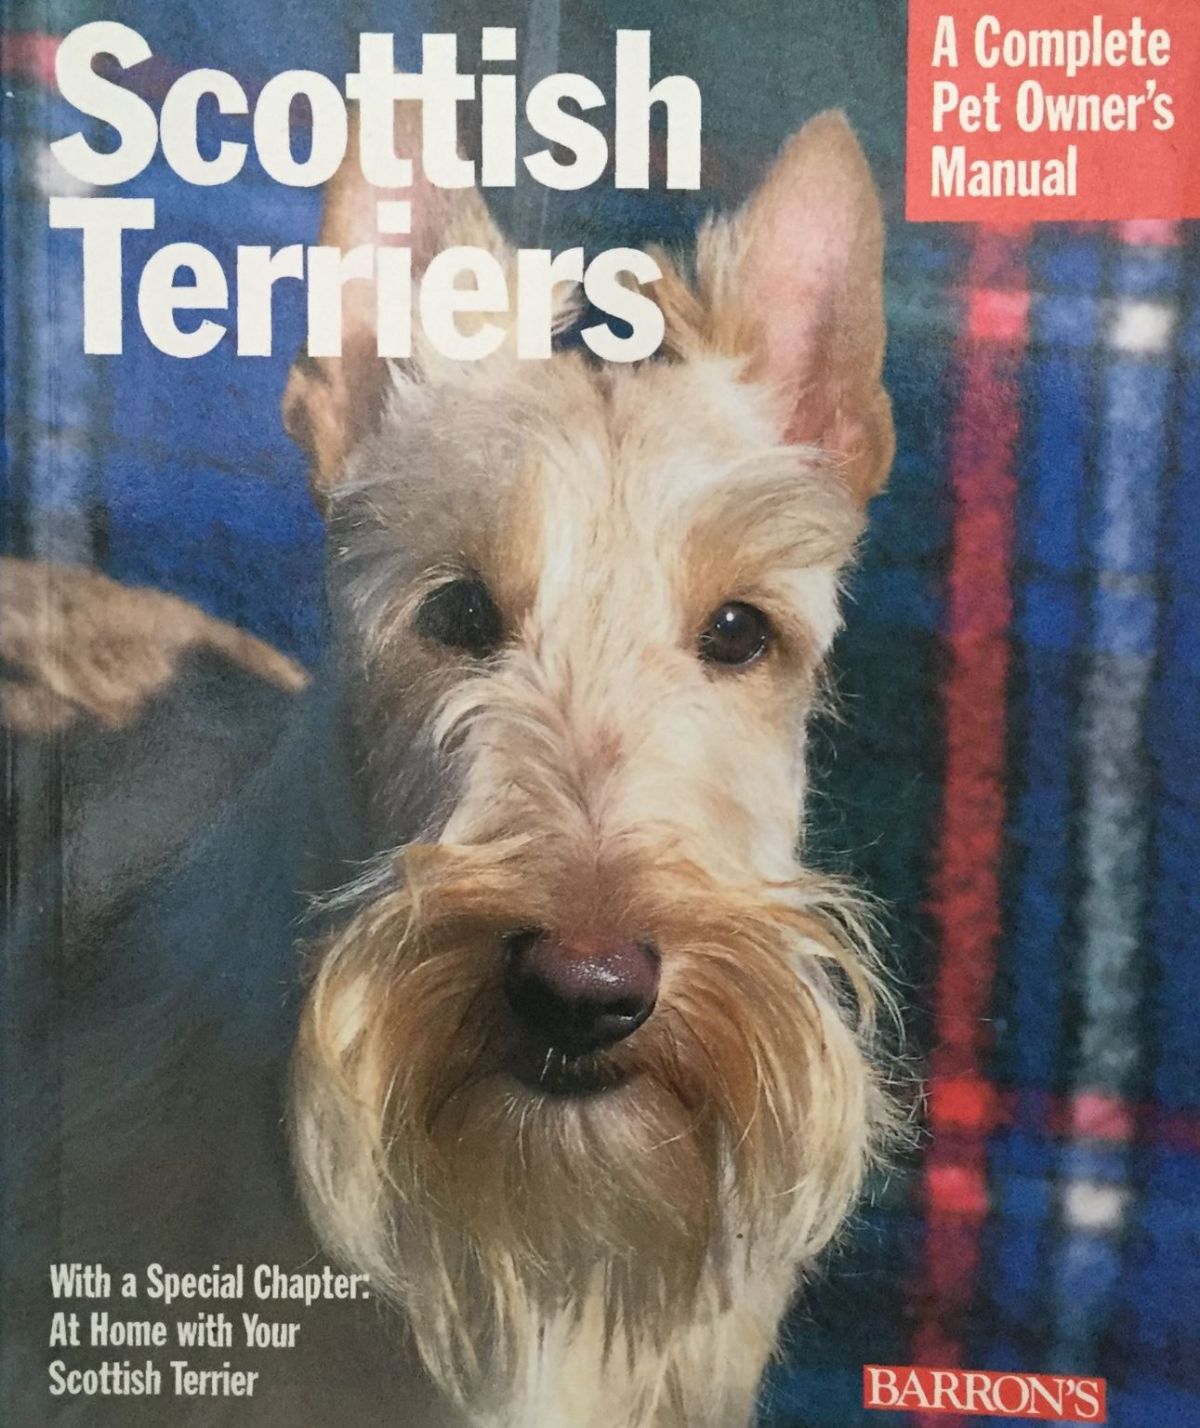 SCOTTISH TERRIERS: A Complete Pet Owner's Manual